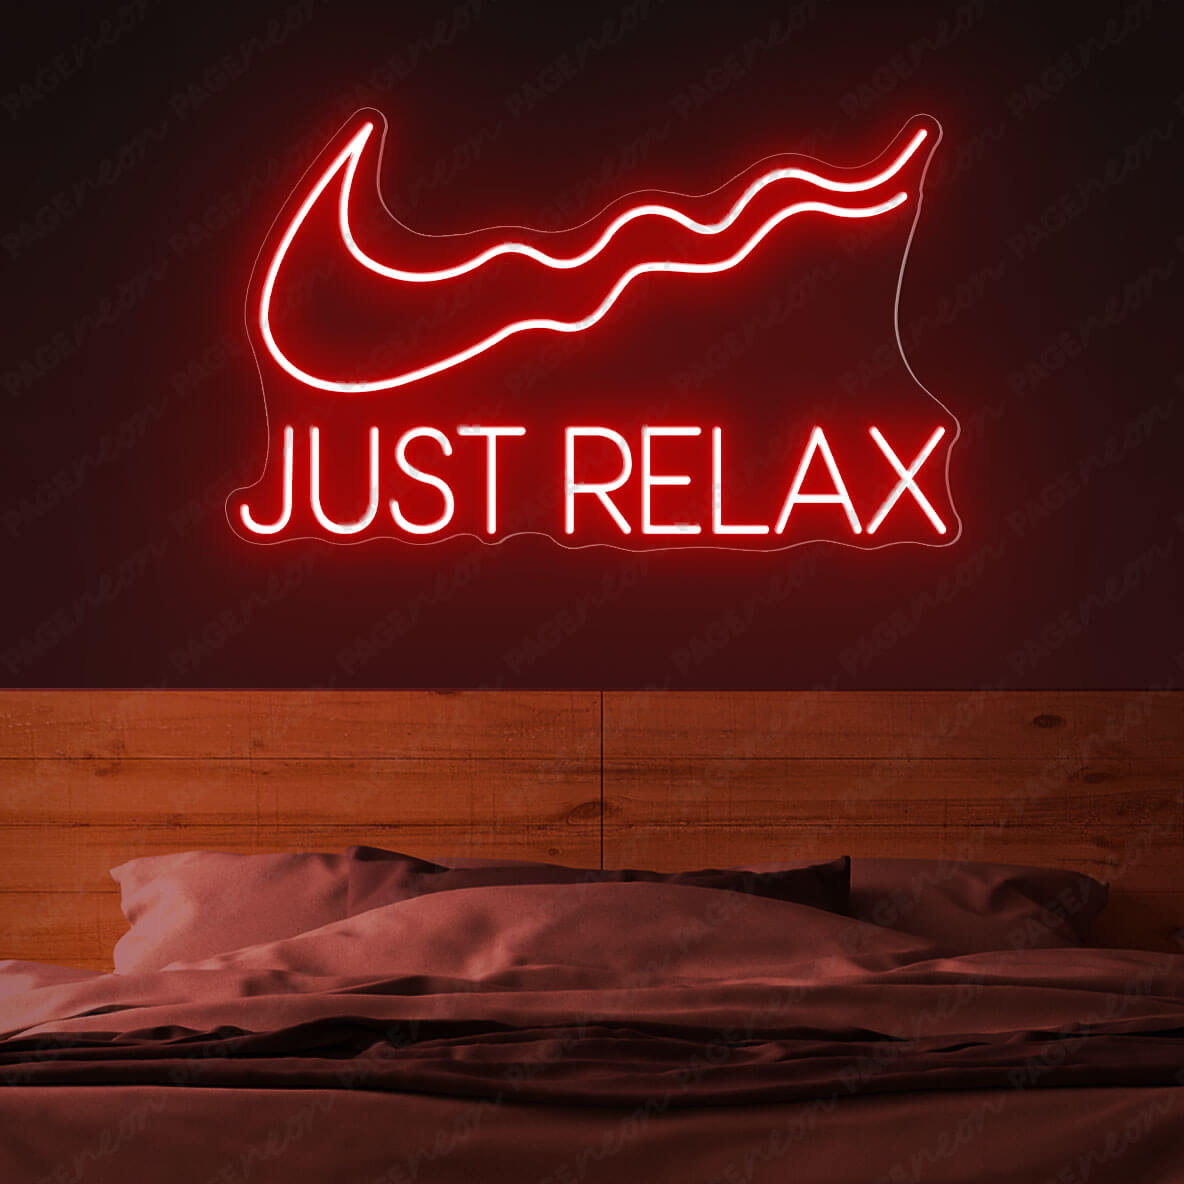 Just Relax Neon Sign Led Light Red